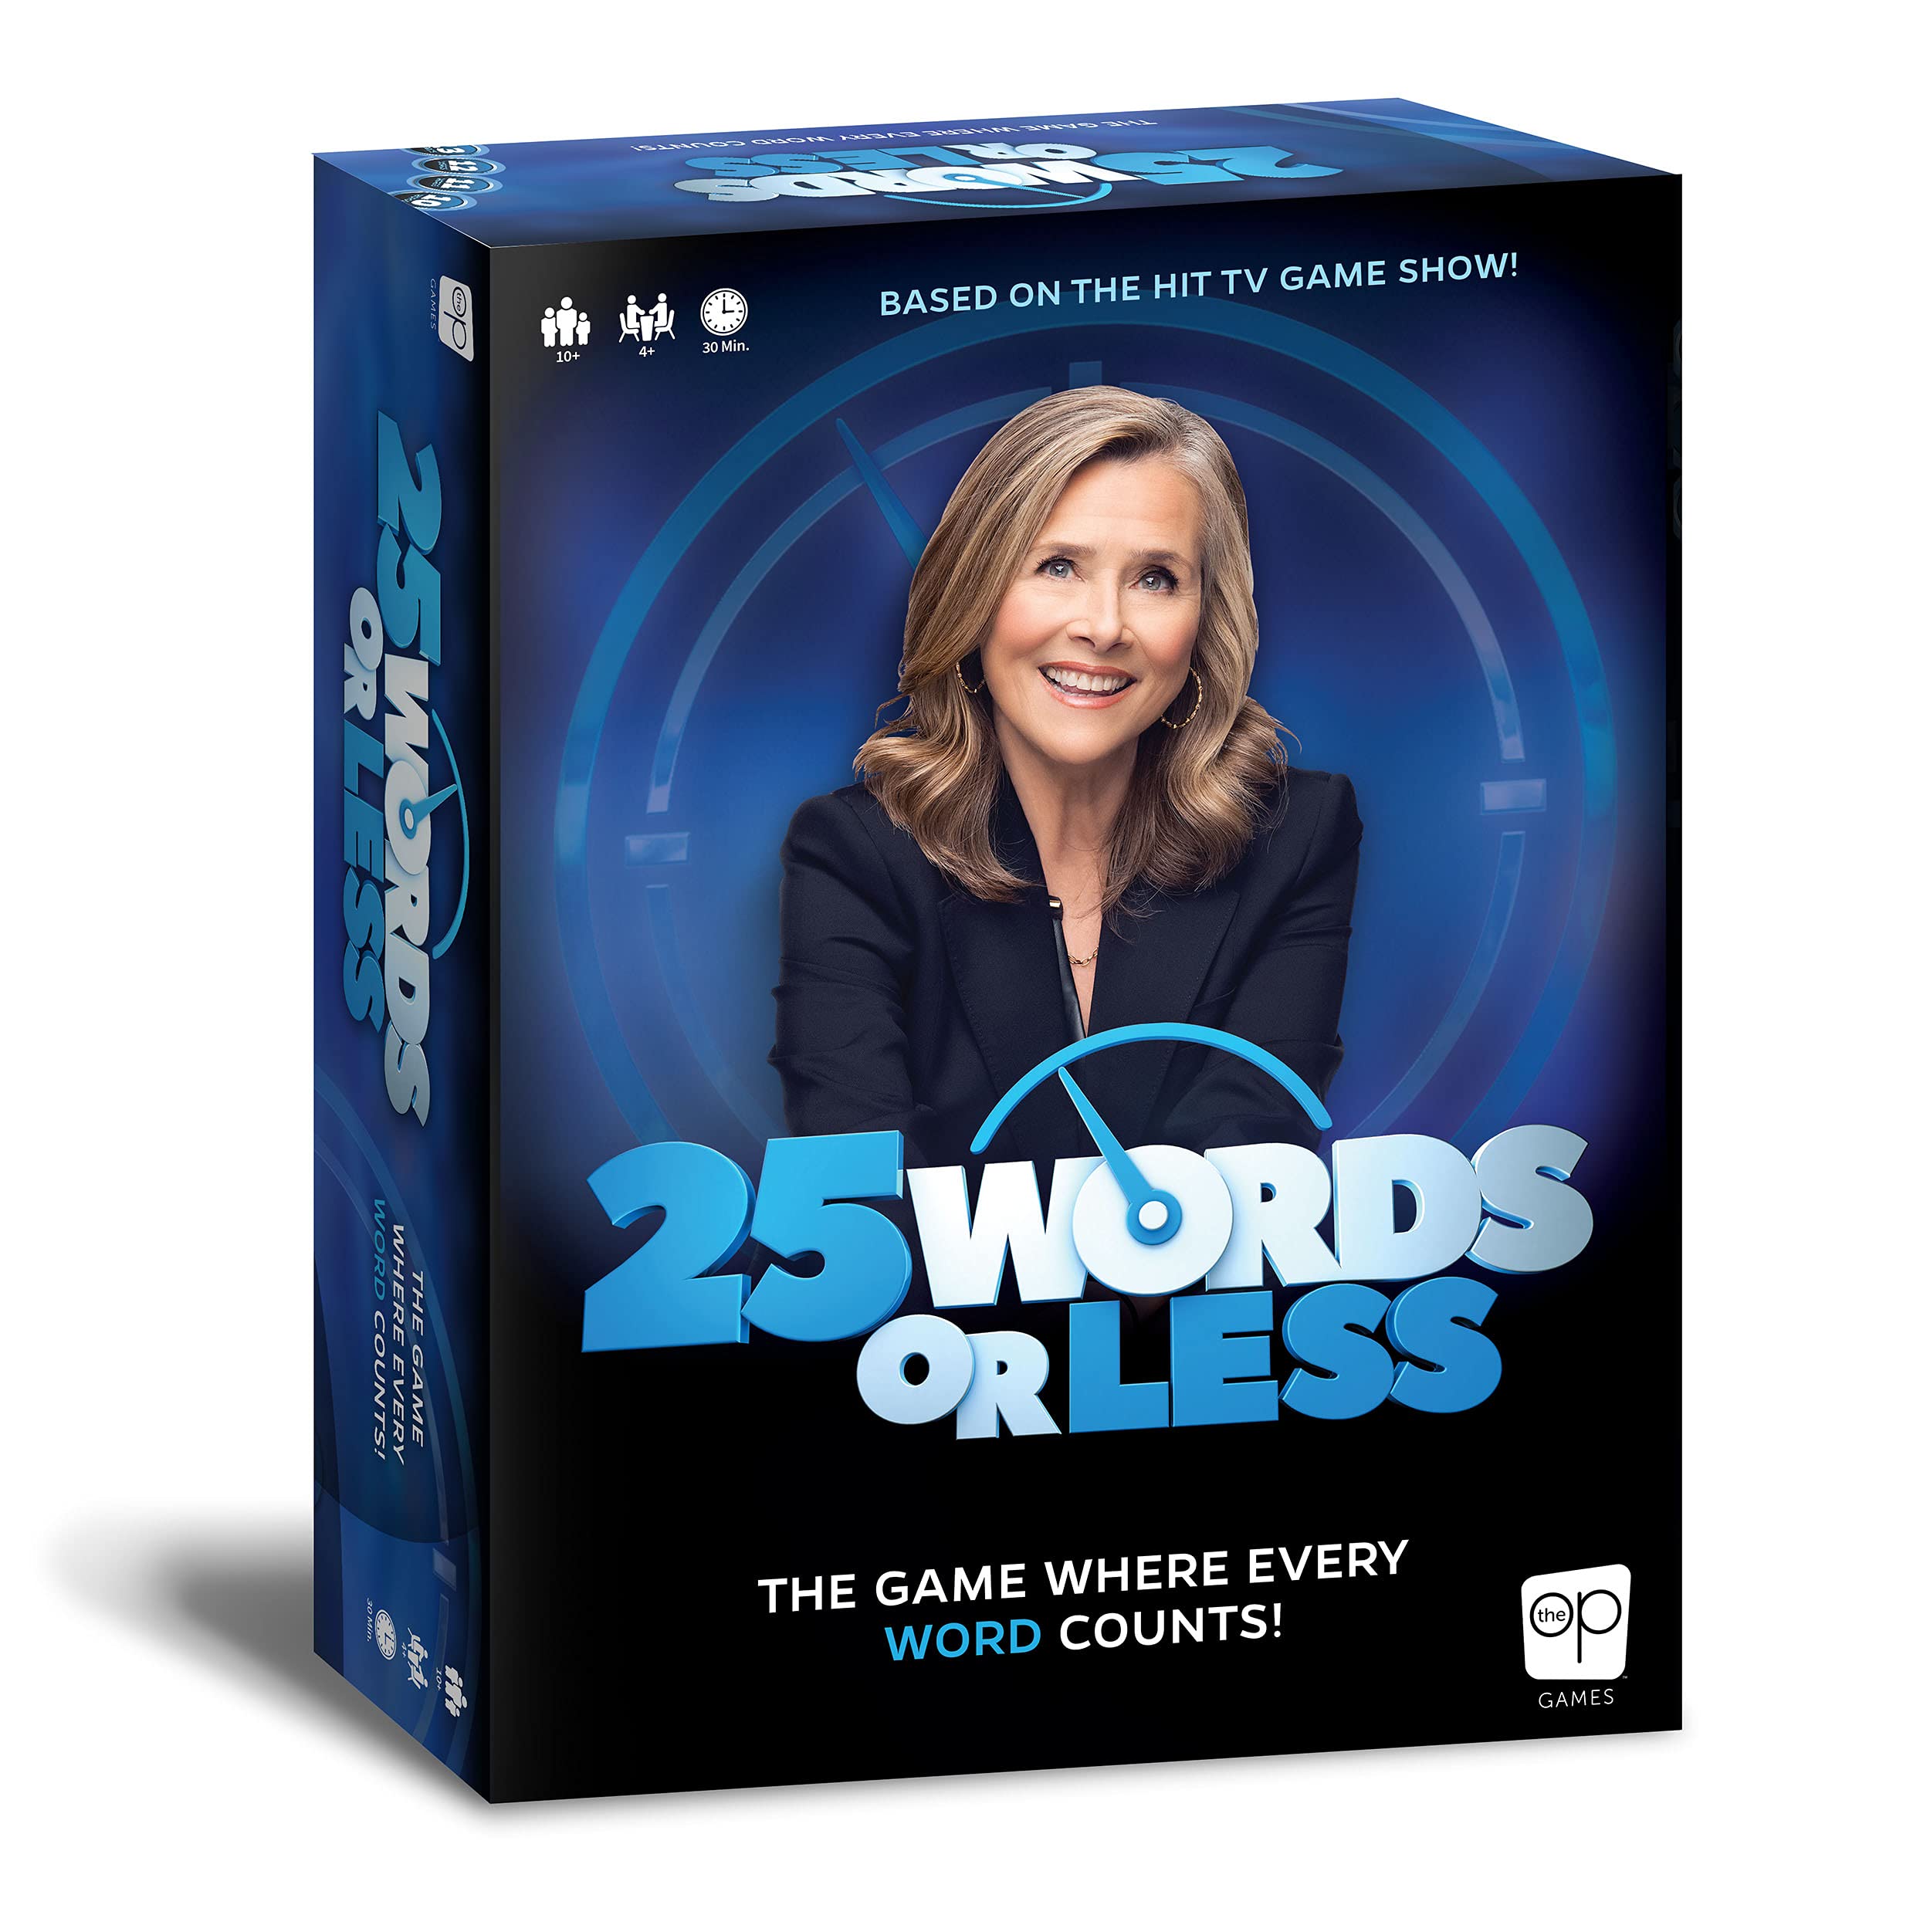 25 Words or Less Fast-Paced Word Game Friends Family Board Game Based on Popular TV Game Show with Meredith Vieira